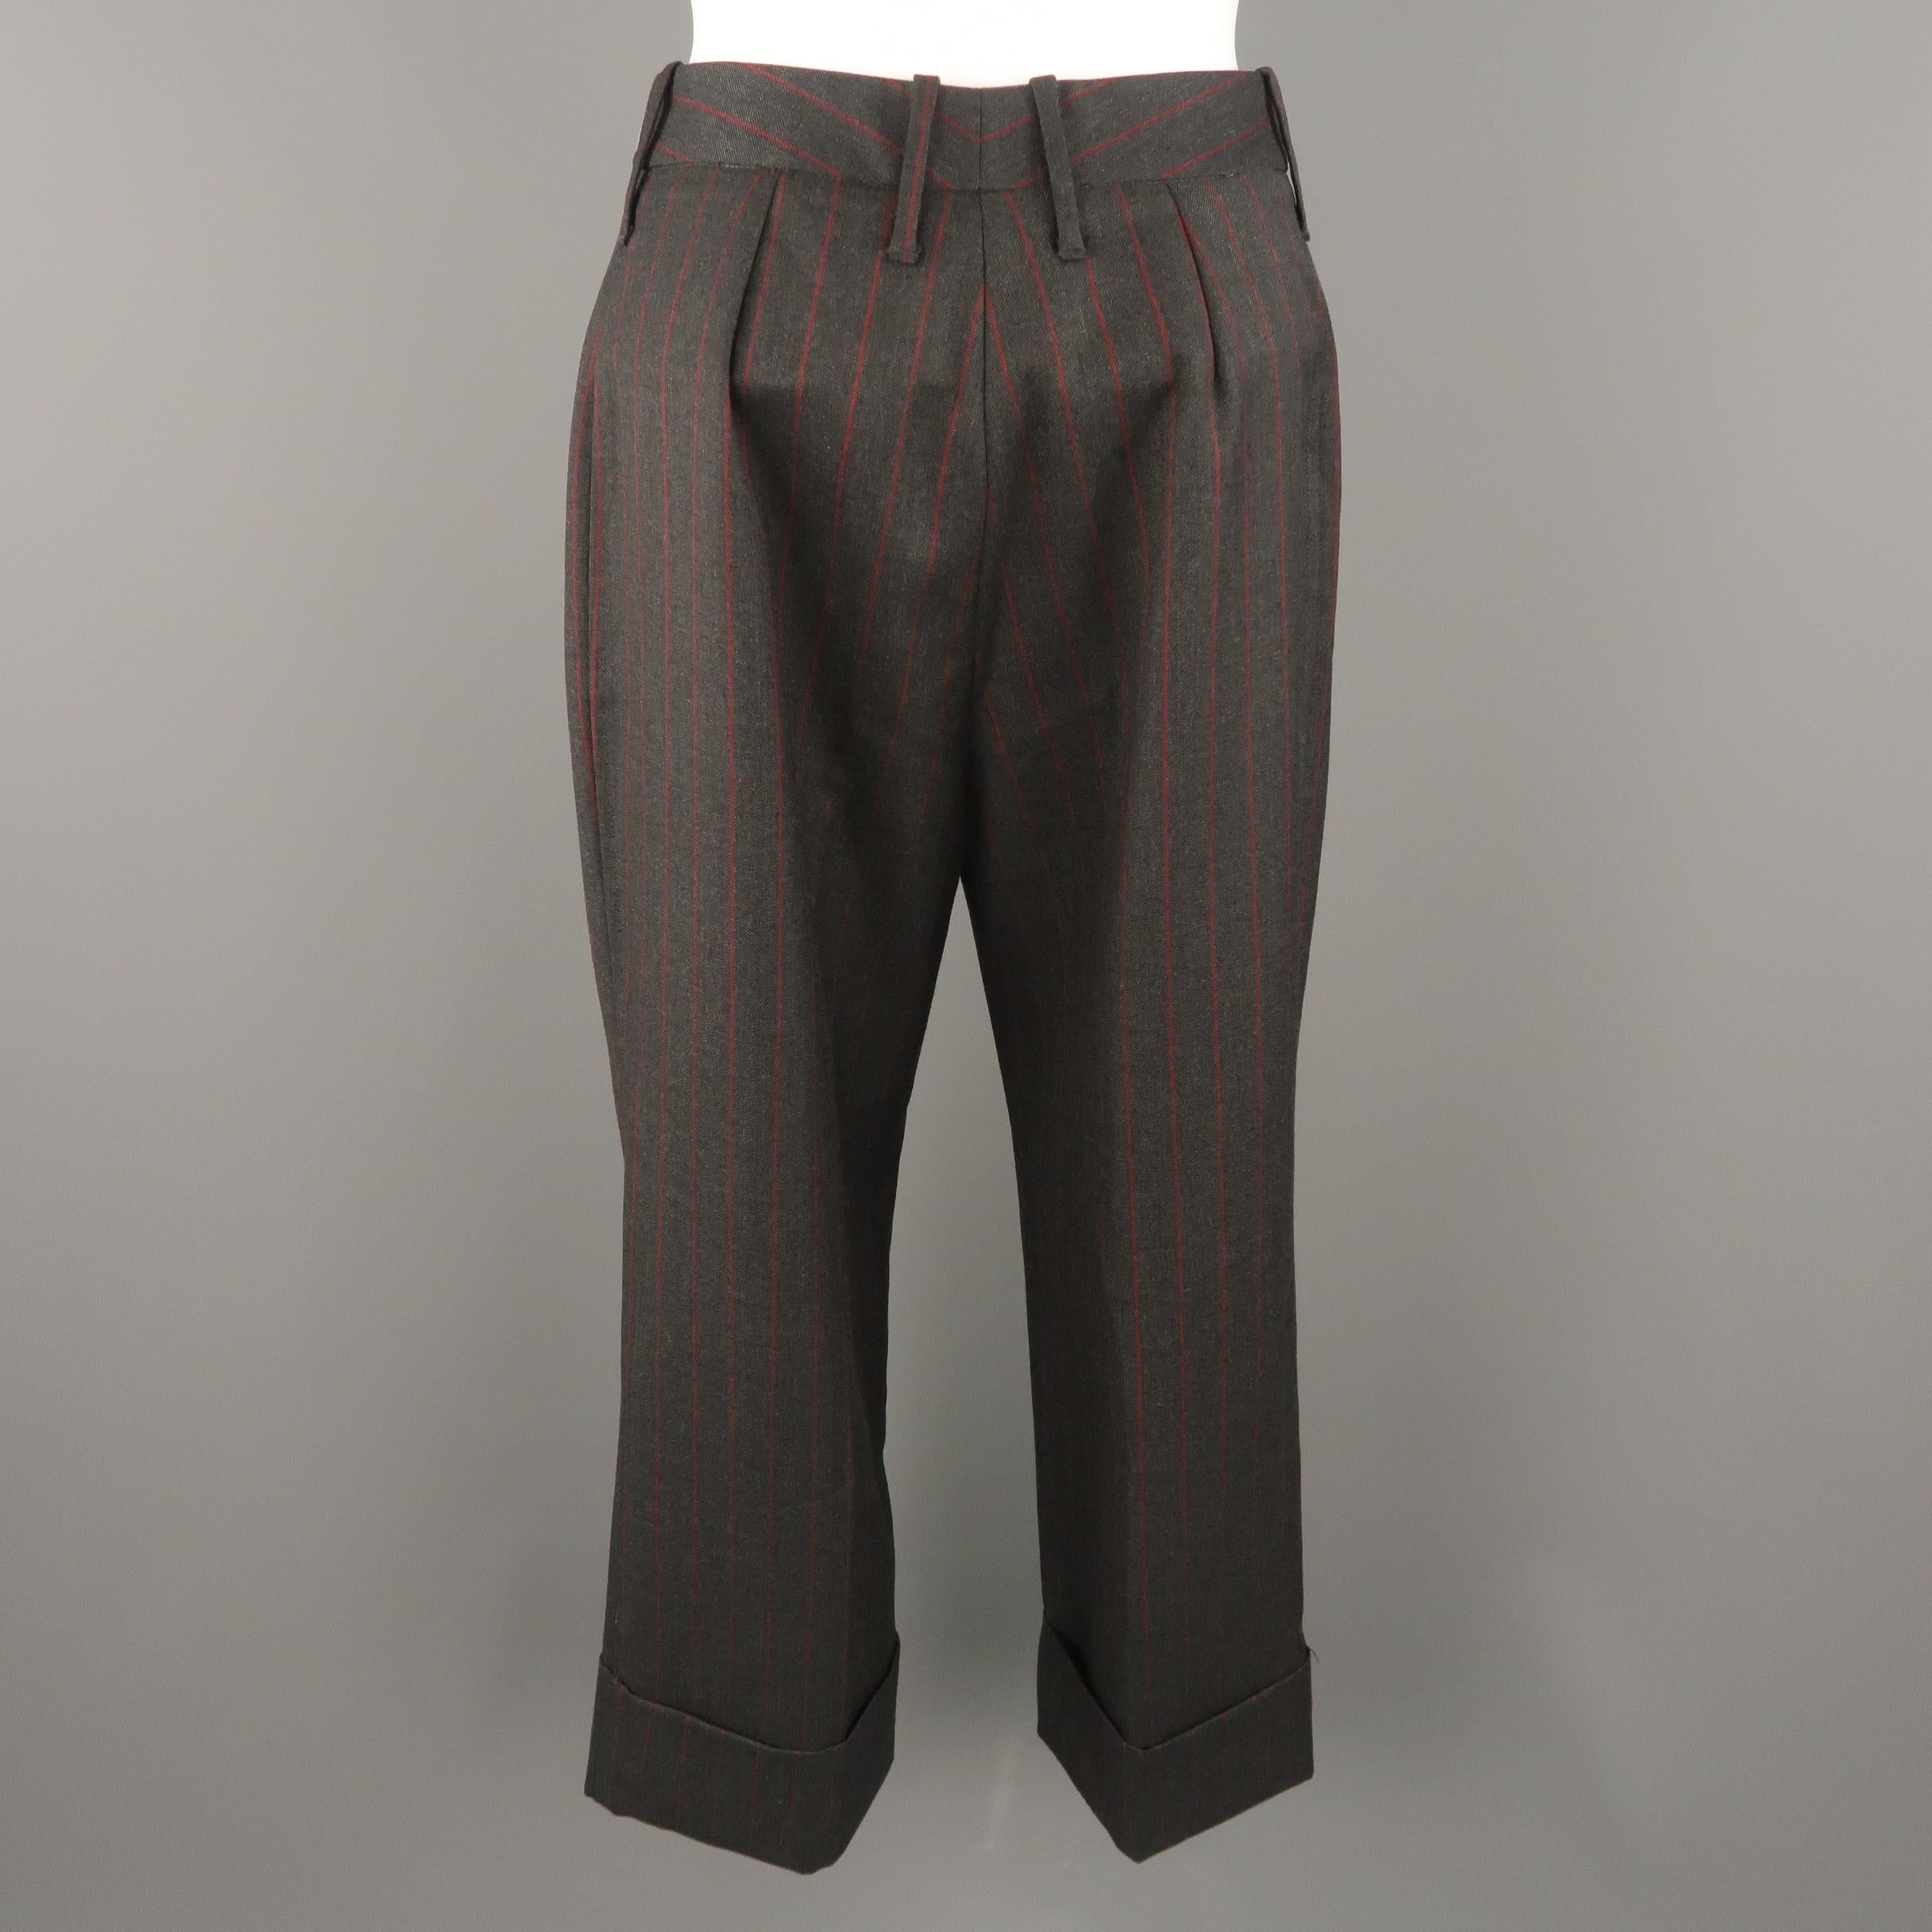  DOLCE & GABBANA Size 6 Charcoal & Red Chalkstripe Wool Cuffed Dress Pants In Excellent Condition In San Francisco, CA